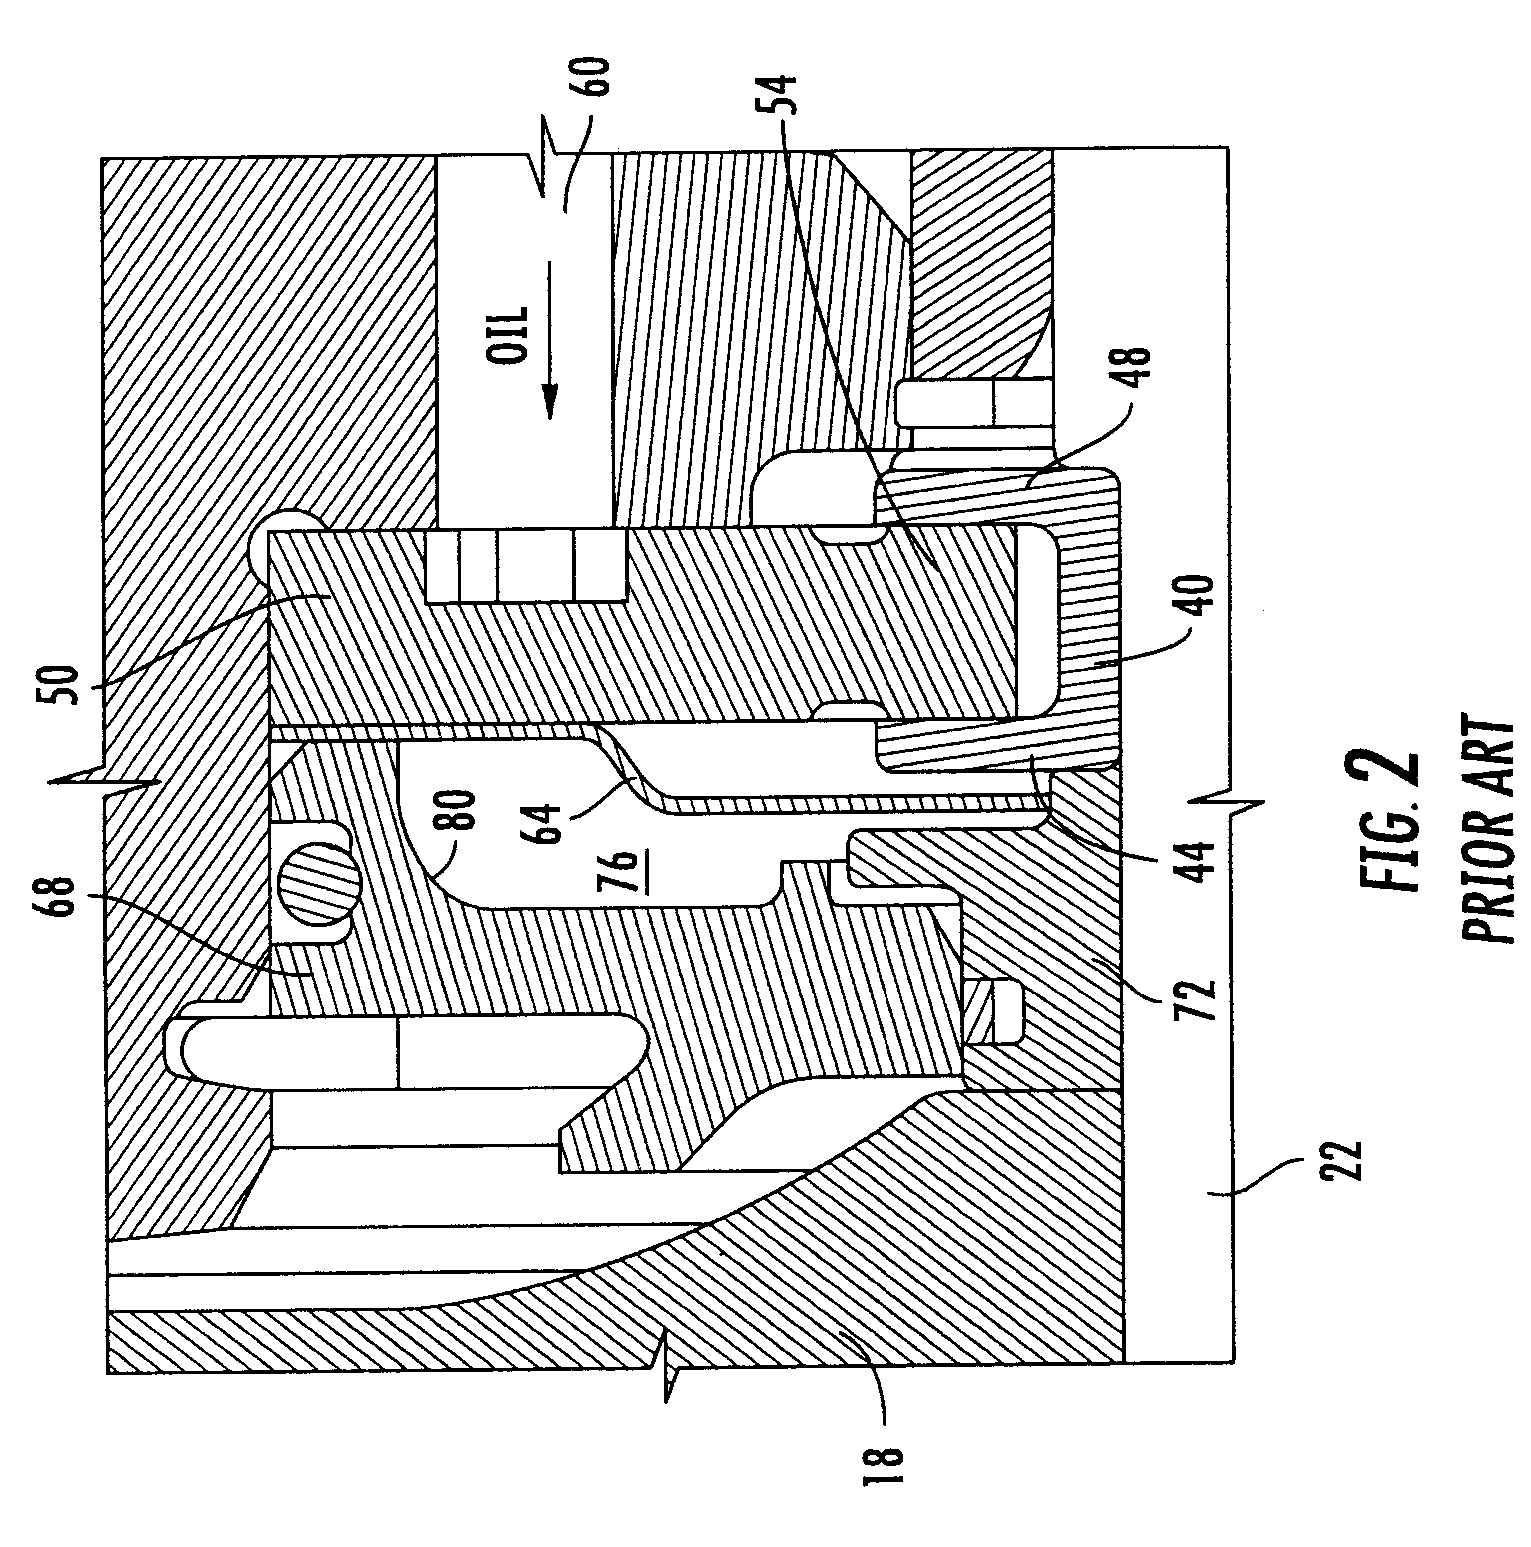 Sealing system between bearing and compressor housing